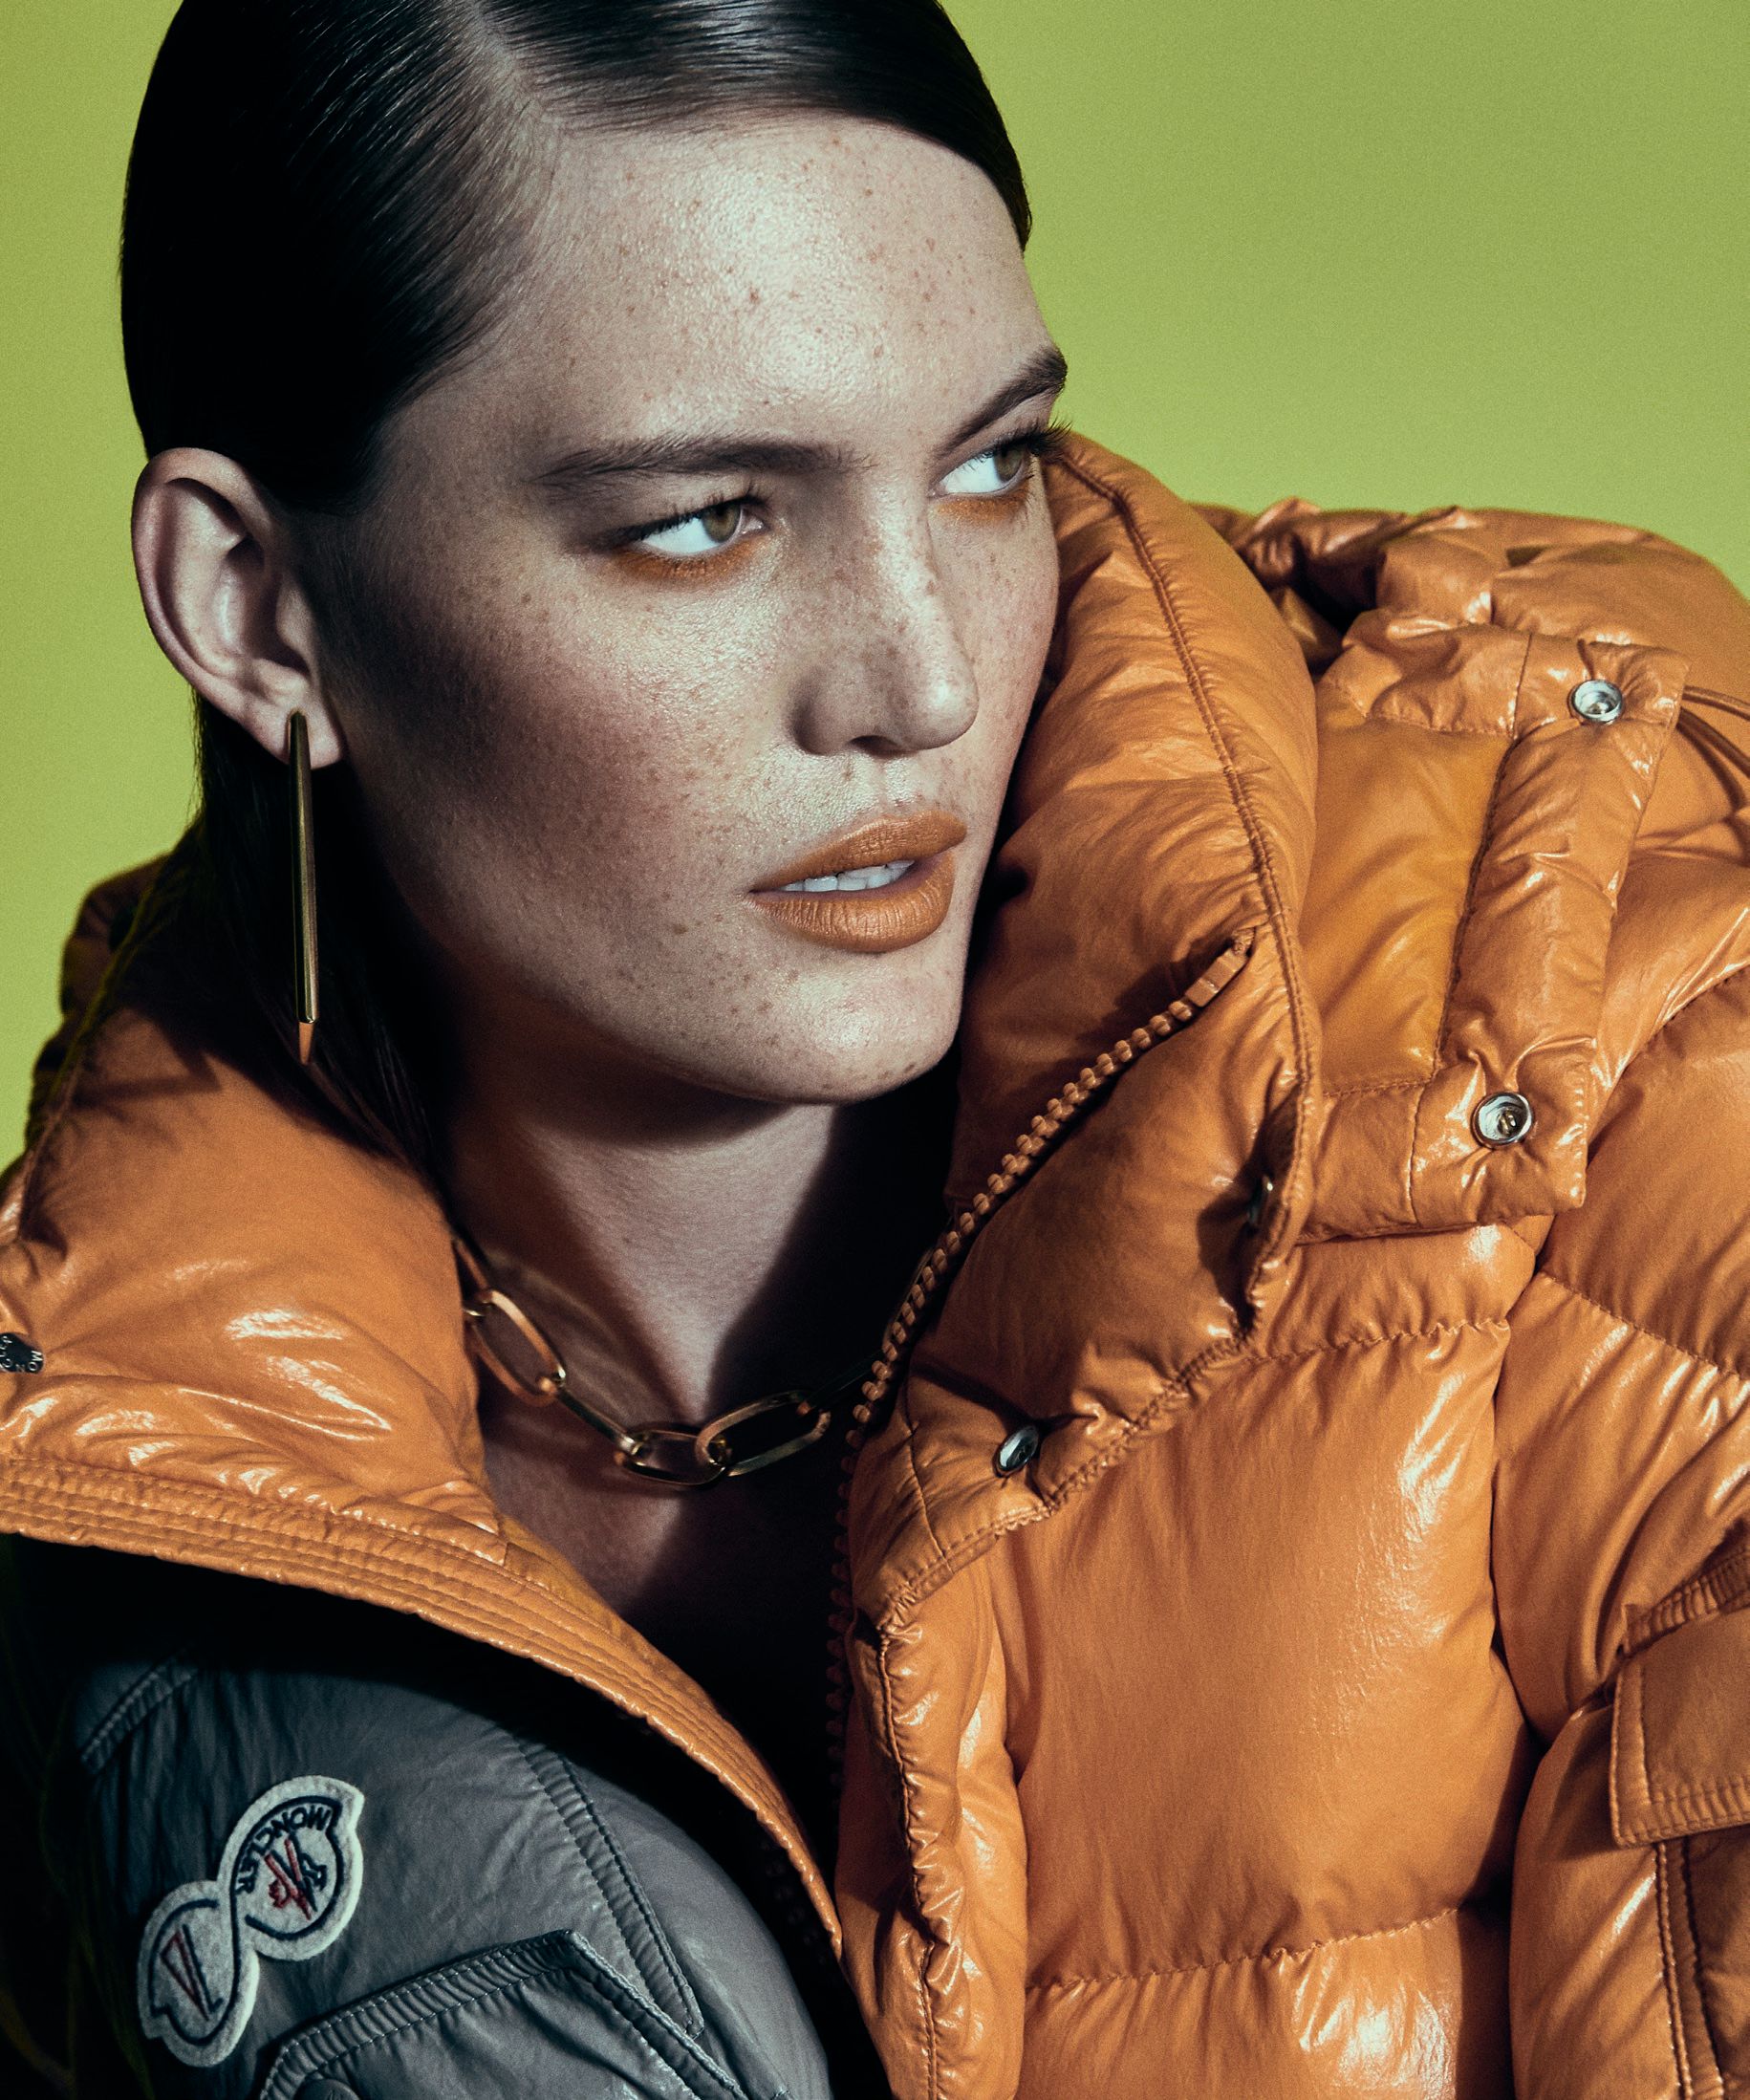 Moncler Maya 70 down jacket in Campfire Orange and Basalt Gray, moncler.com. Photographed by Yossi Michaeli Styled by Faye Power Vande Vrede